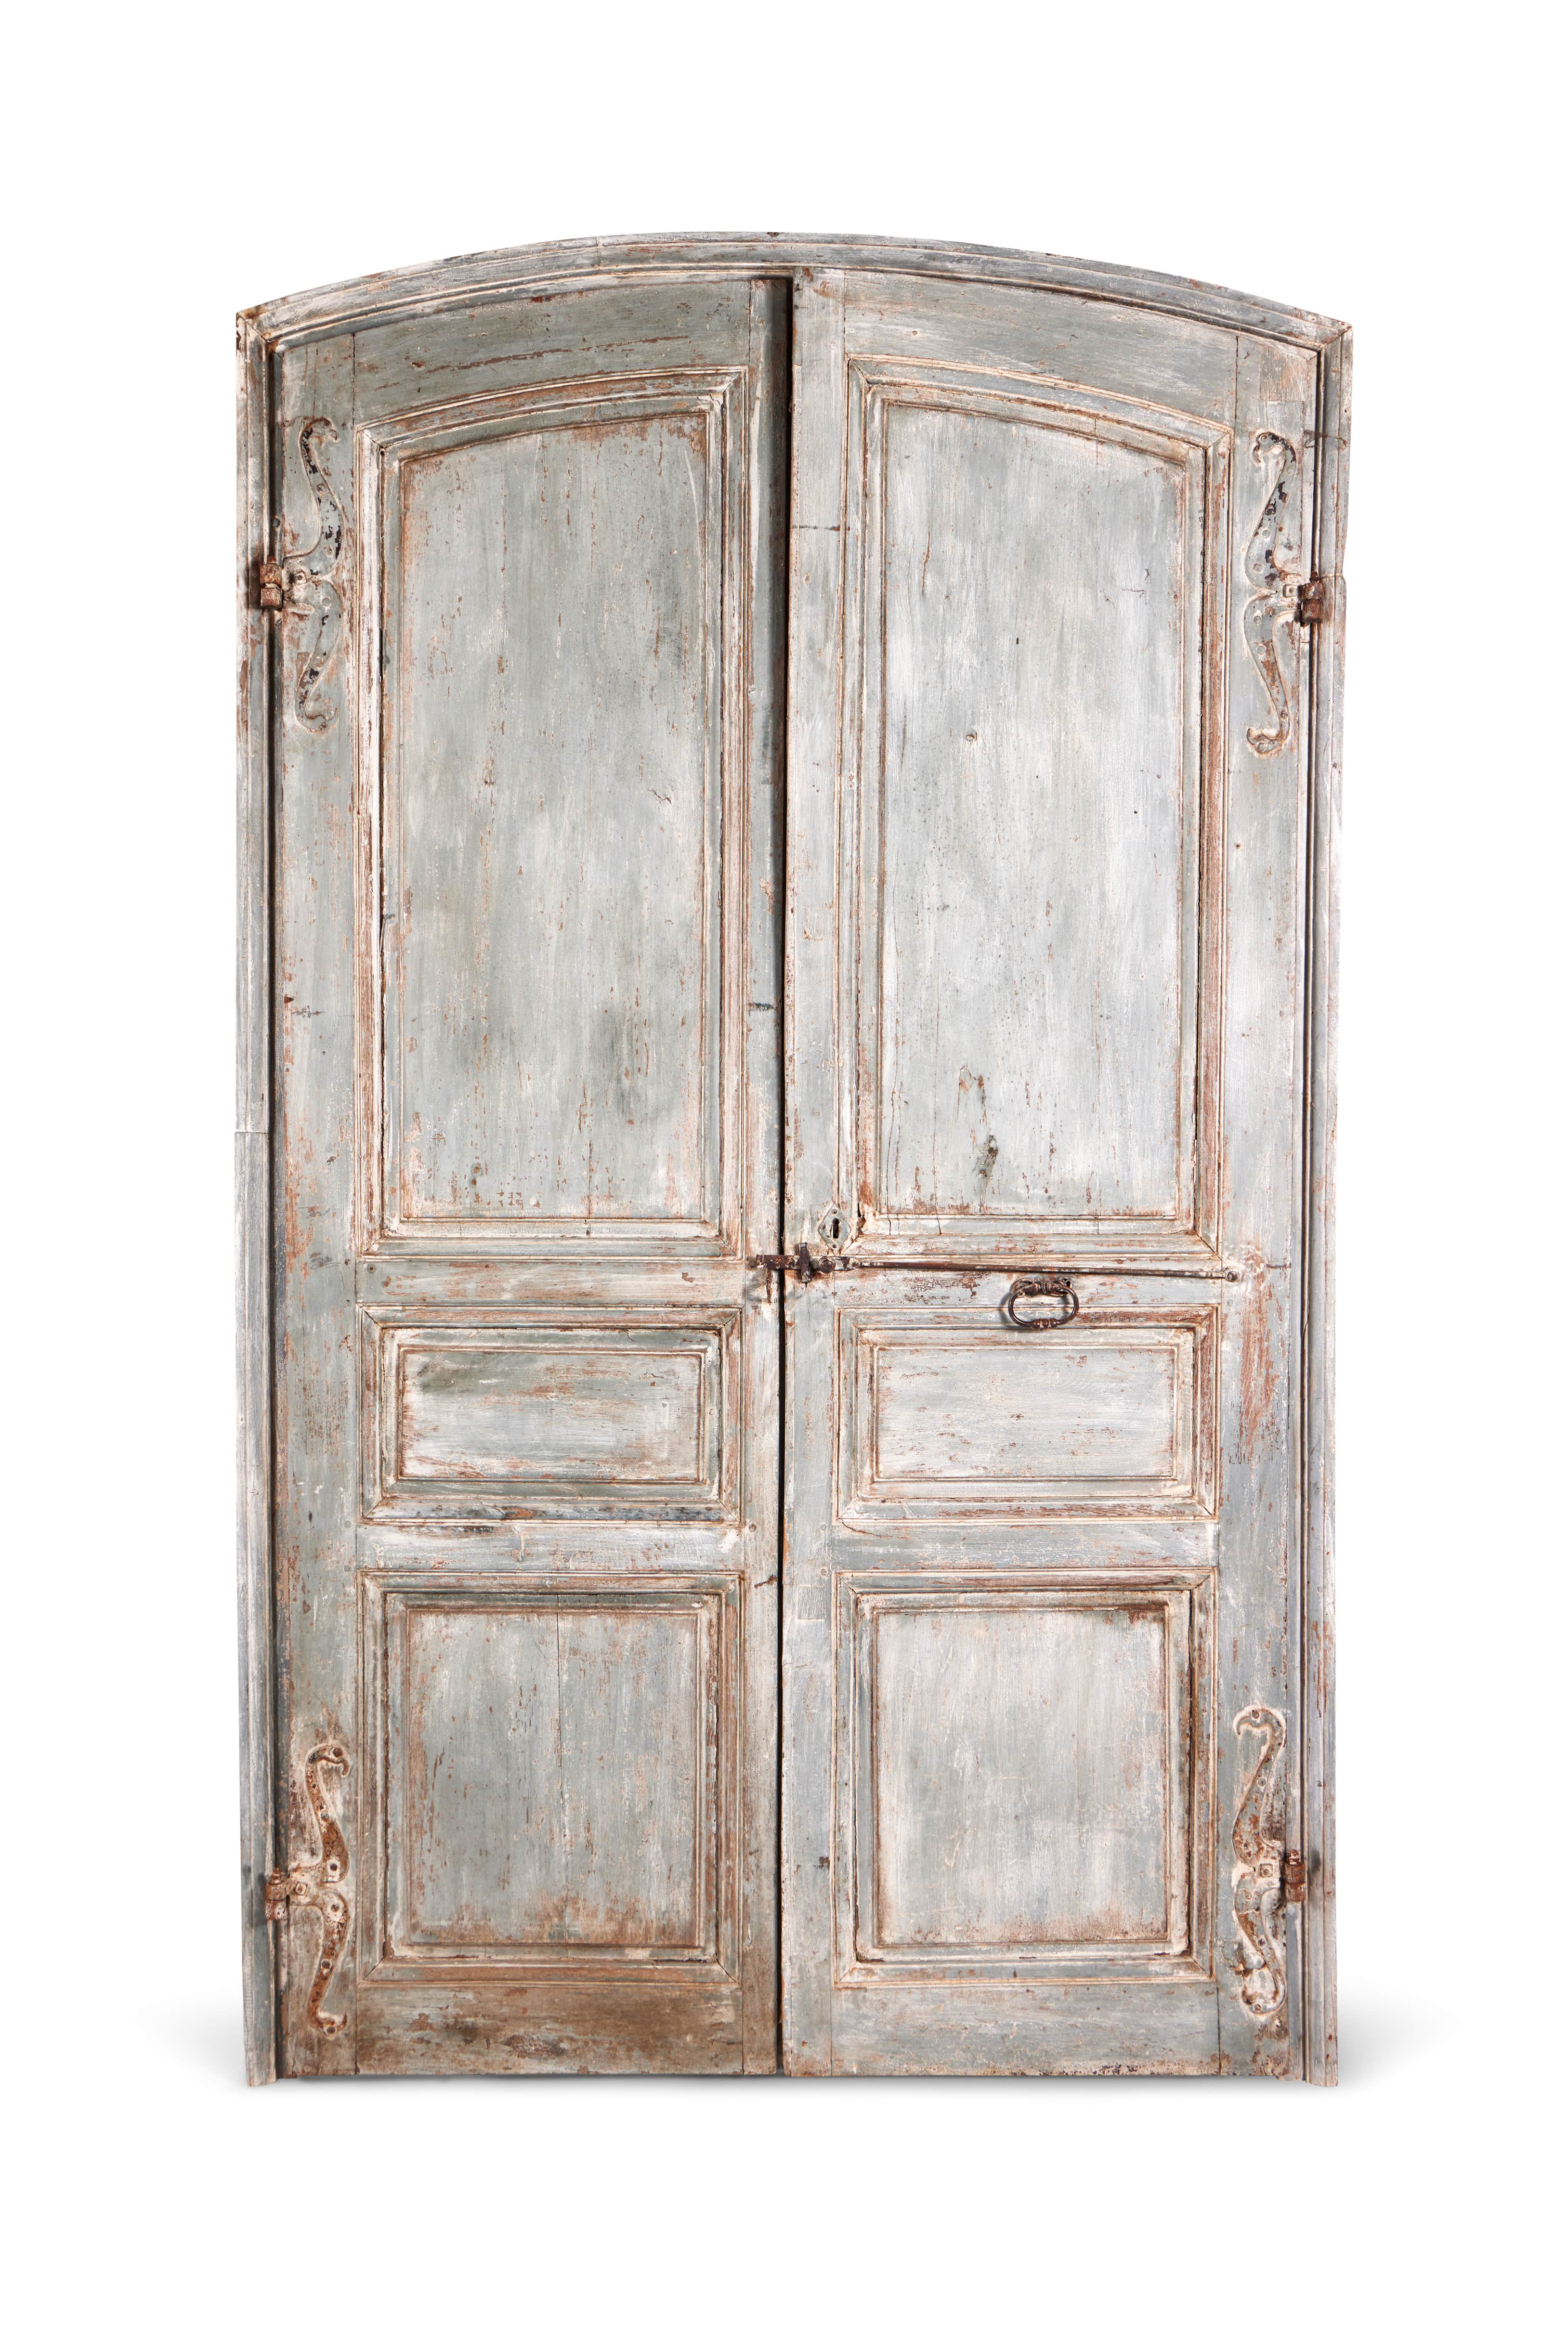 A large pair of 18th century French blue painted doors